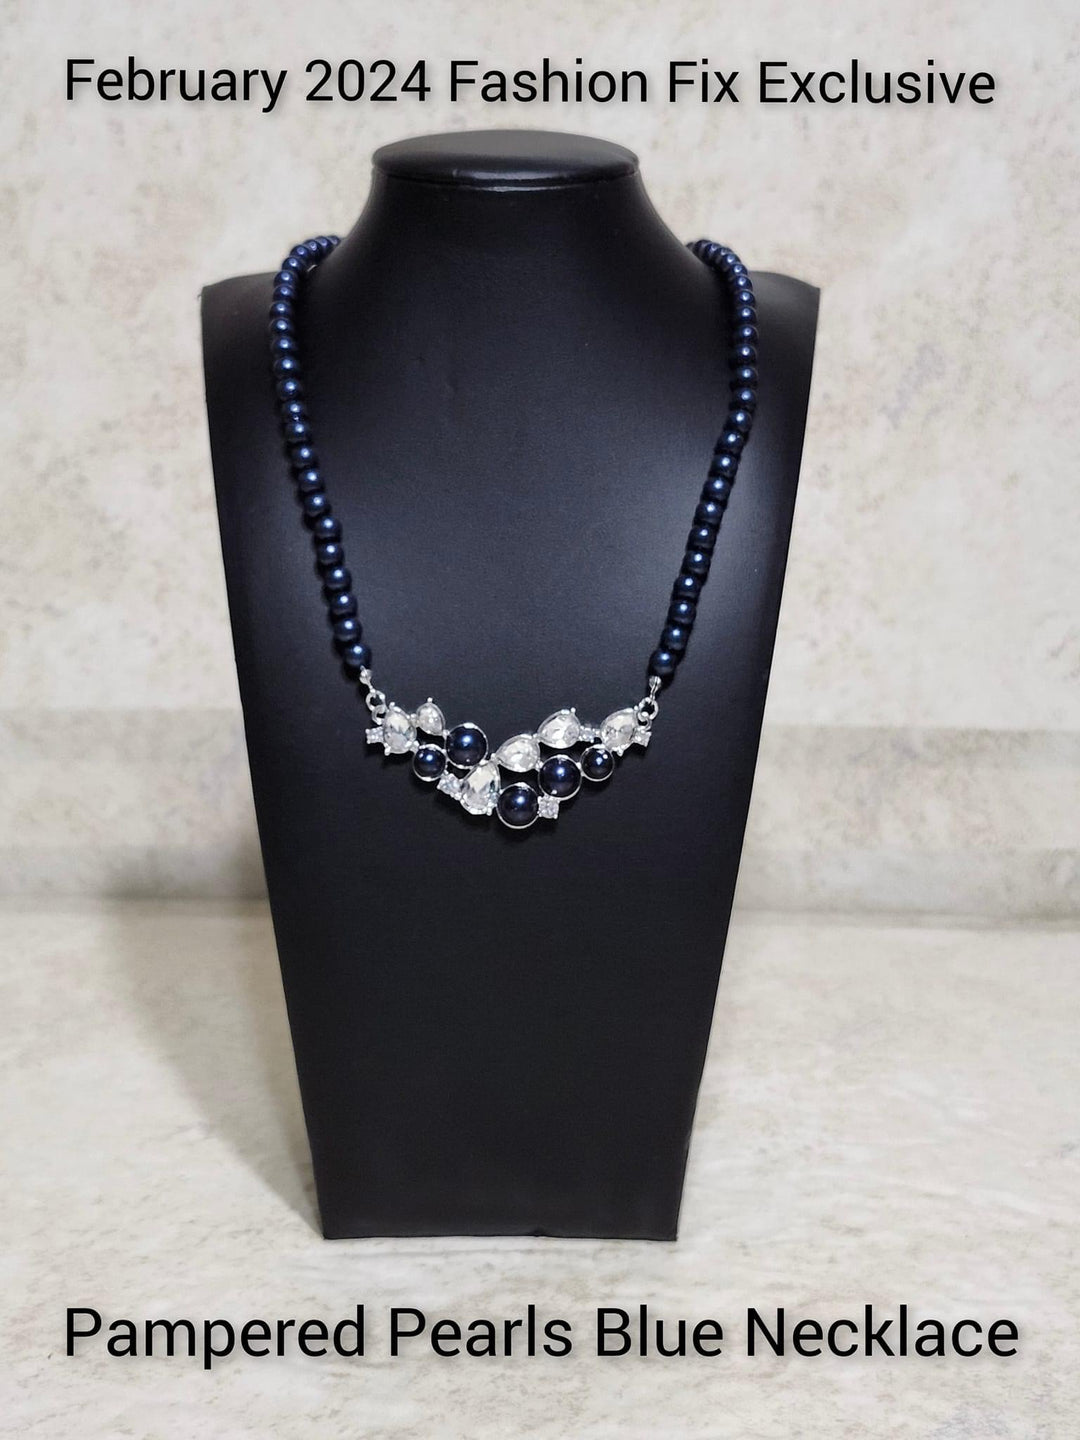 Pampered Pearls - Blue Necklace - Paparazzi Accessories - A single strand of navy pearls elegantly cascades below the collar to meet a refined collection of navy pearls in varying sizes and white gems pressed in round and teardrop frames for a sparkly finish.